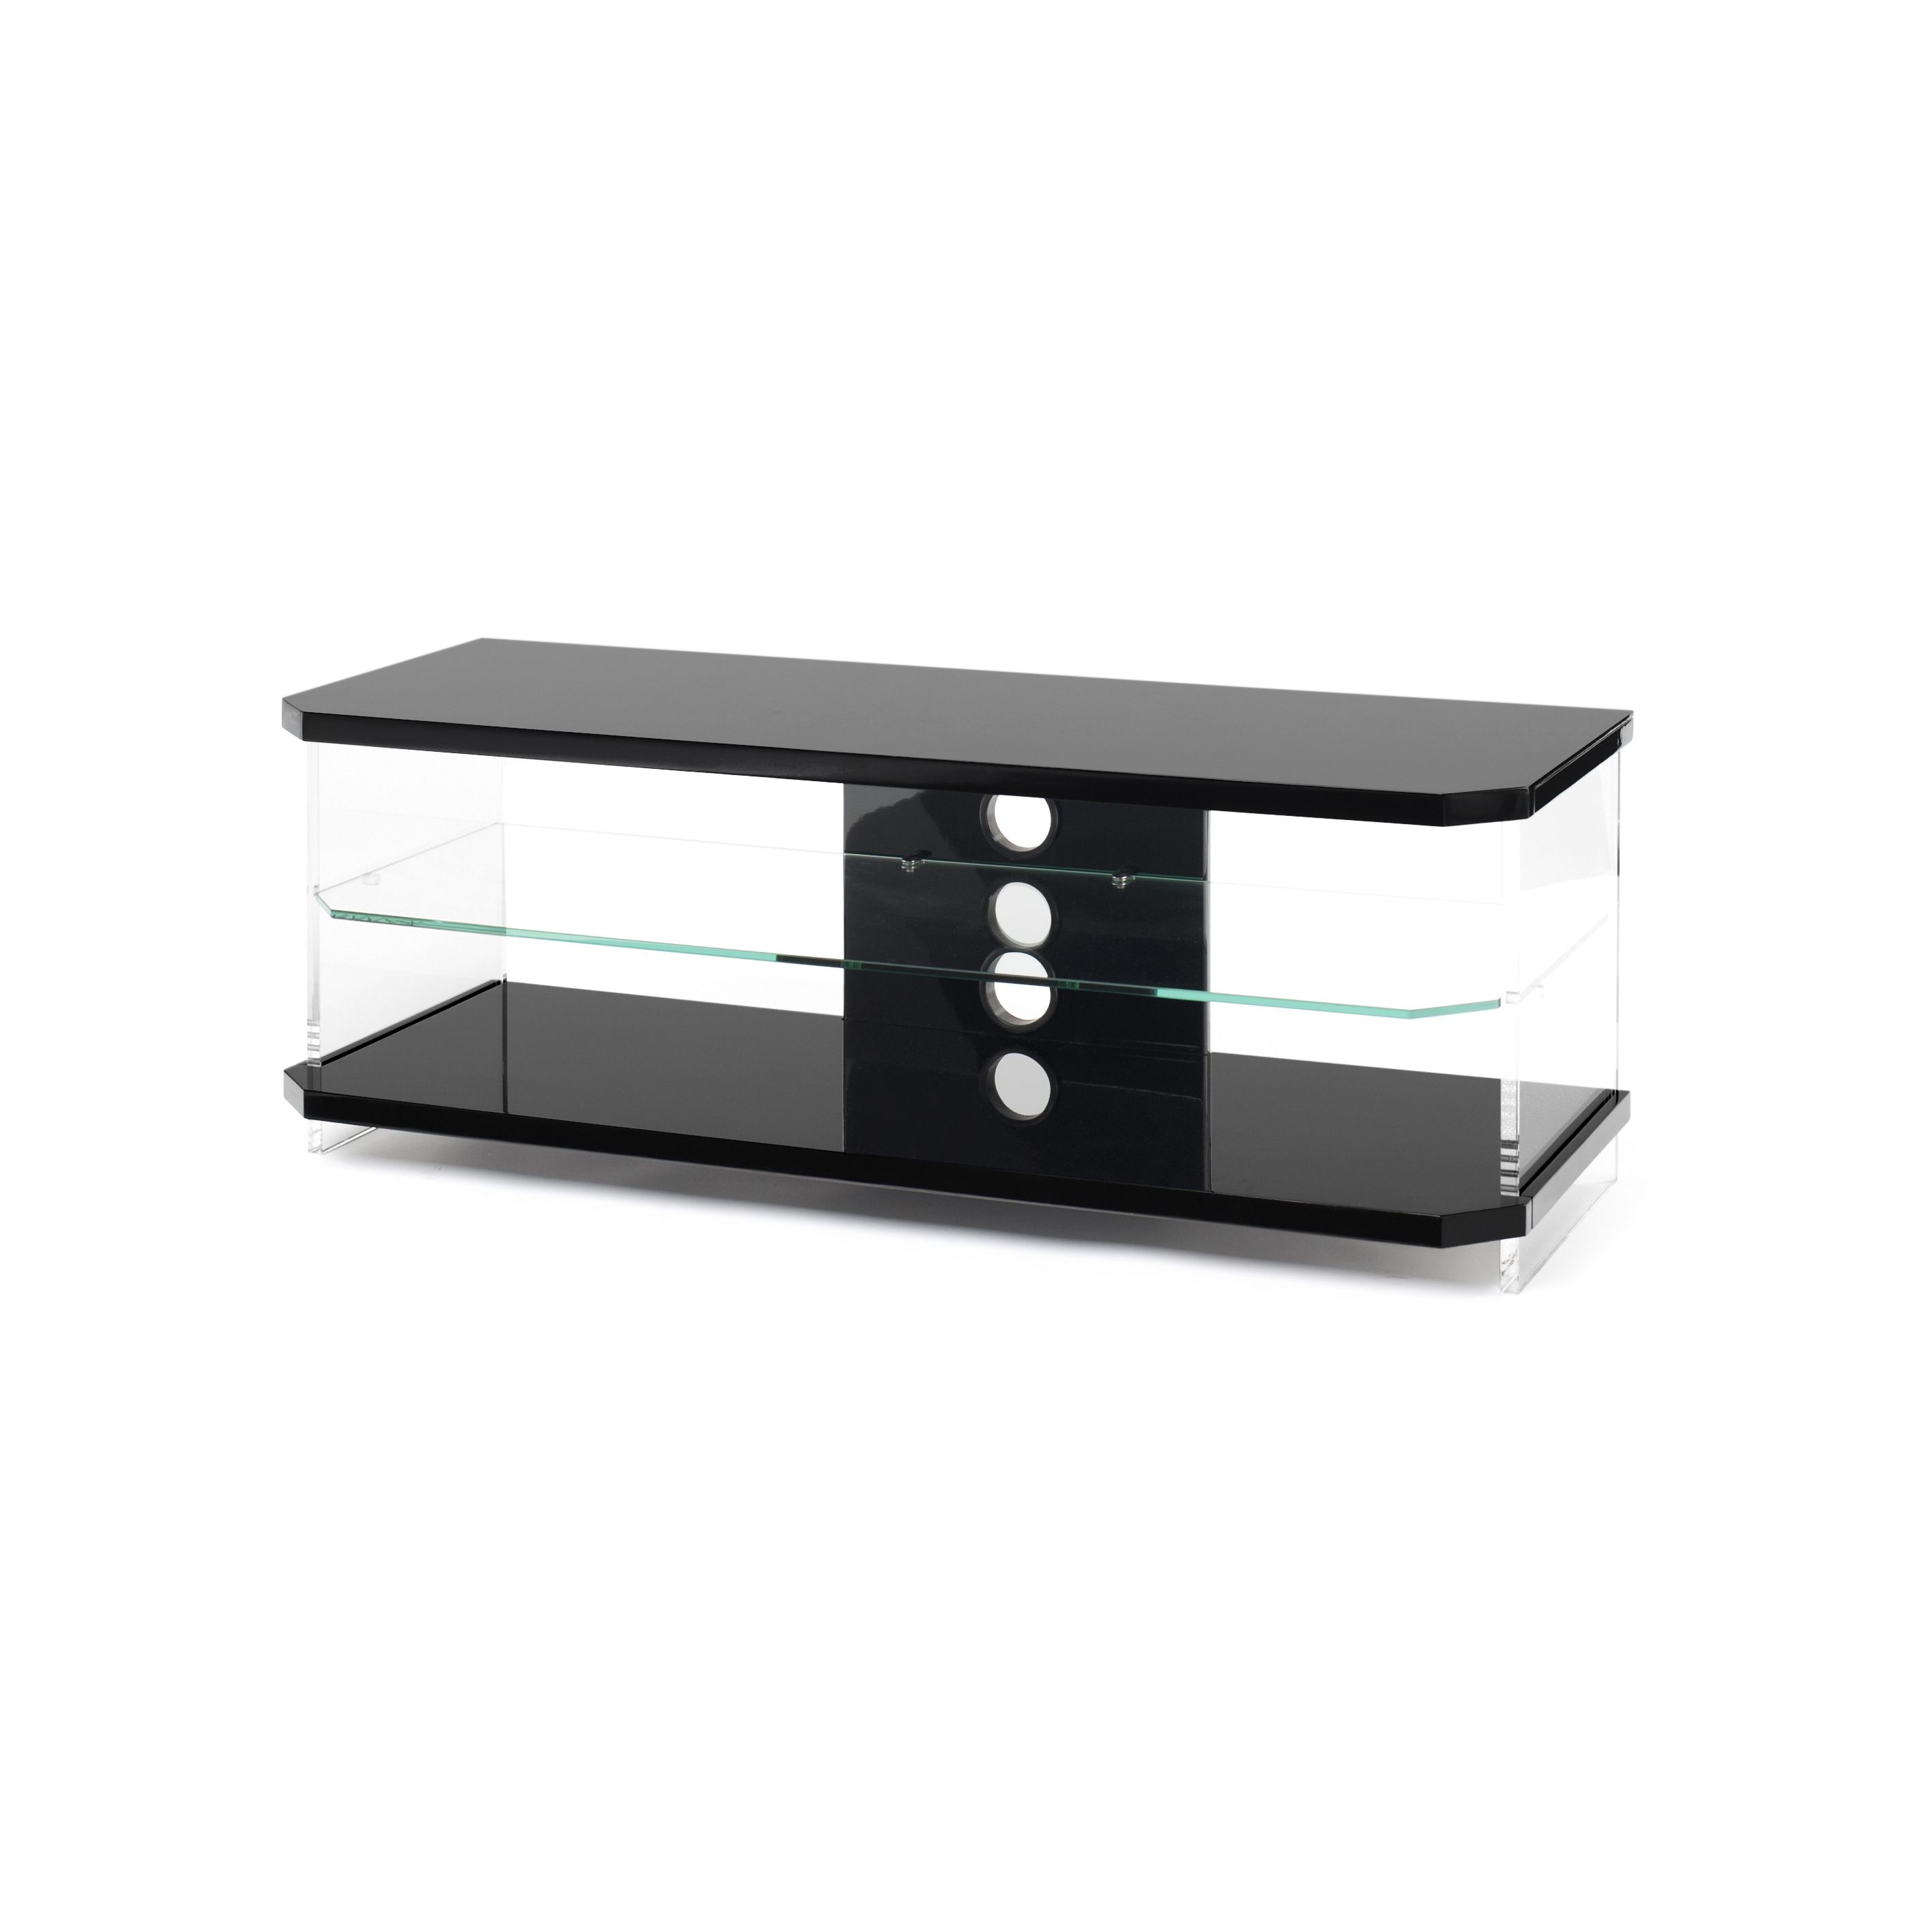 Techlink – Black Tv Stands With Best And Newest Techlink Corner Tv Stands (View 9 of 20)